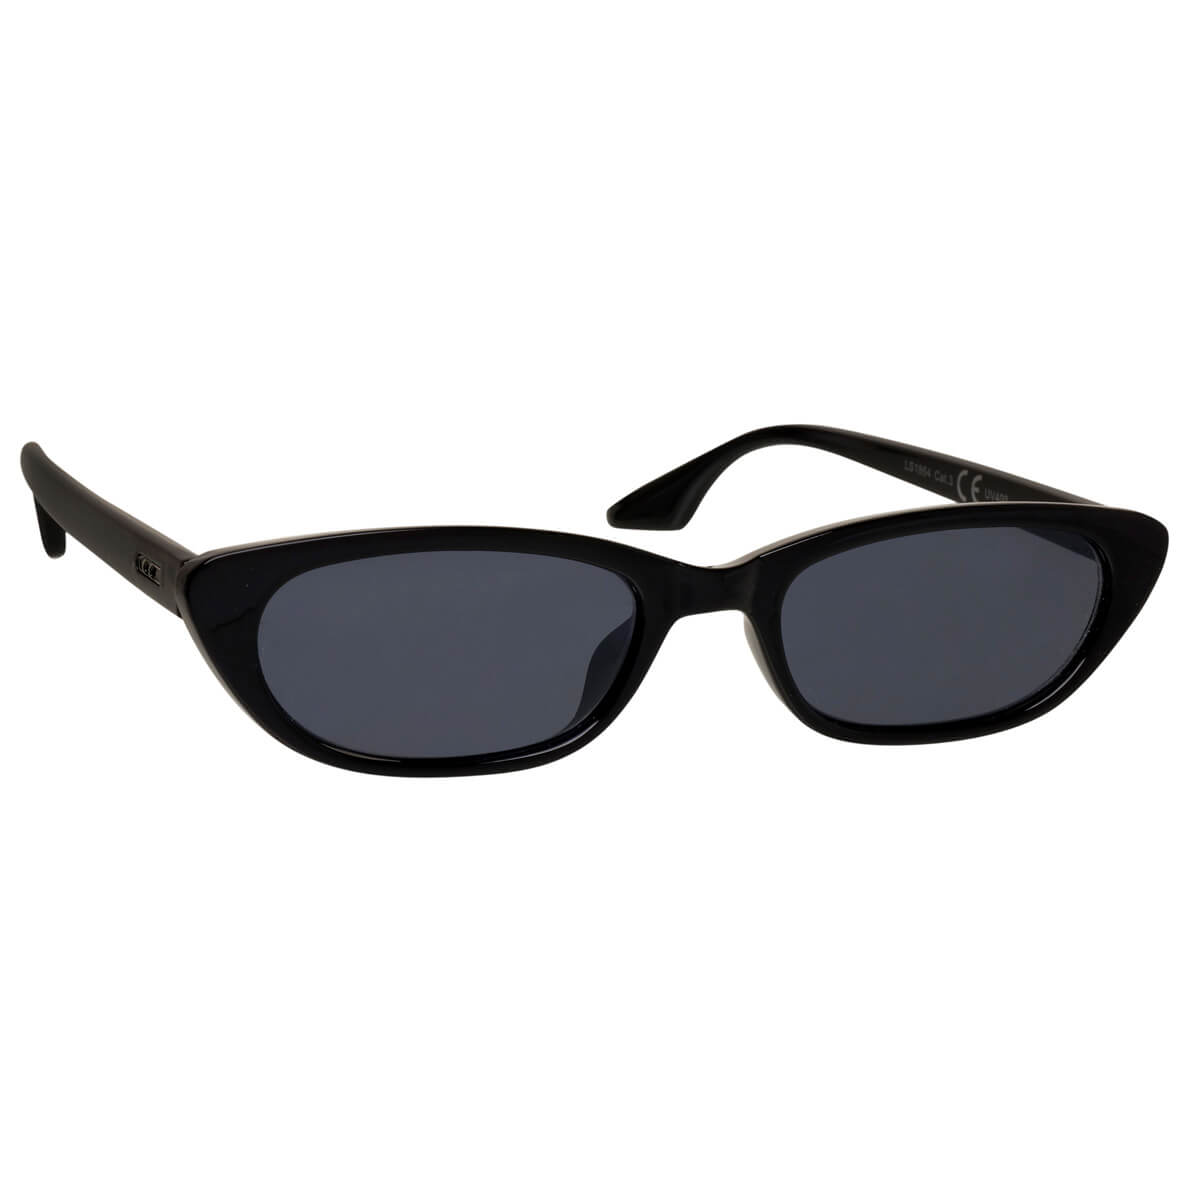 Low oval sunglasses with decoration